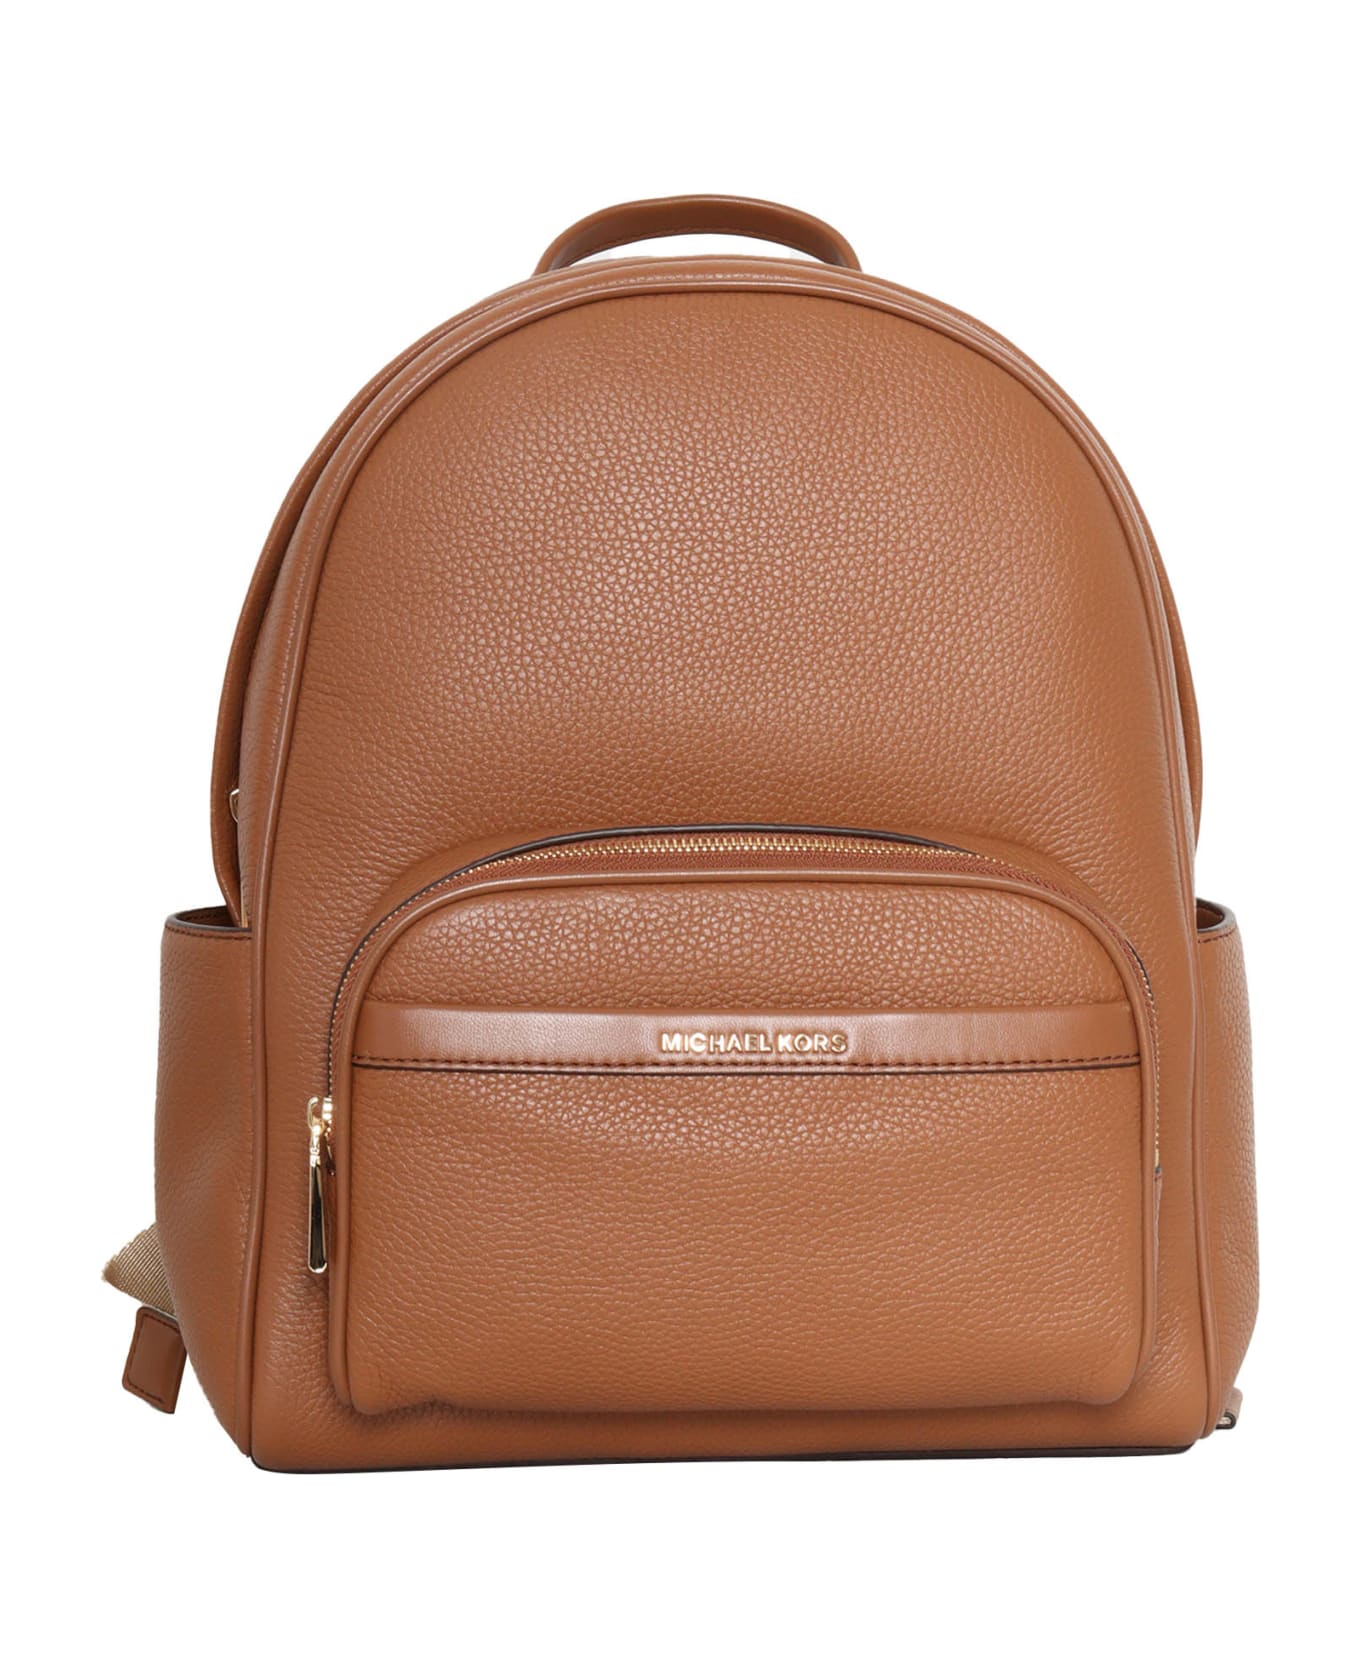 Michael Kors Brown Leather Backpack - BROWN バックパック